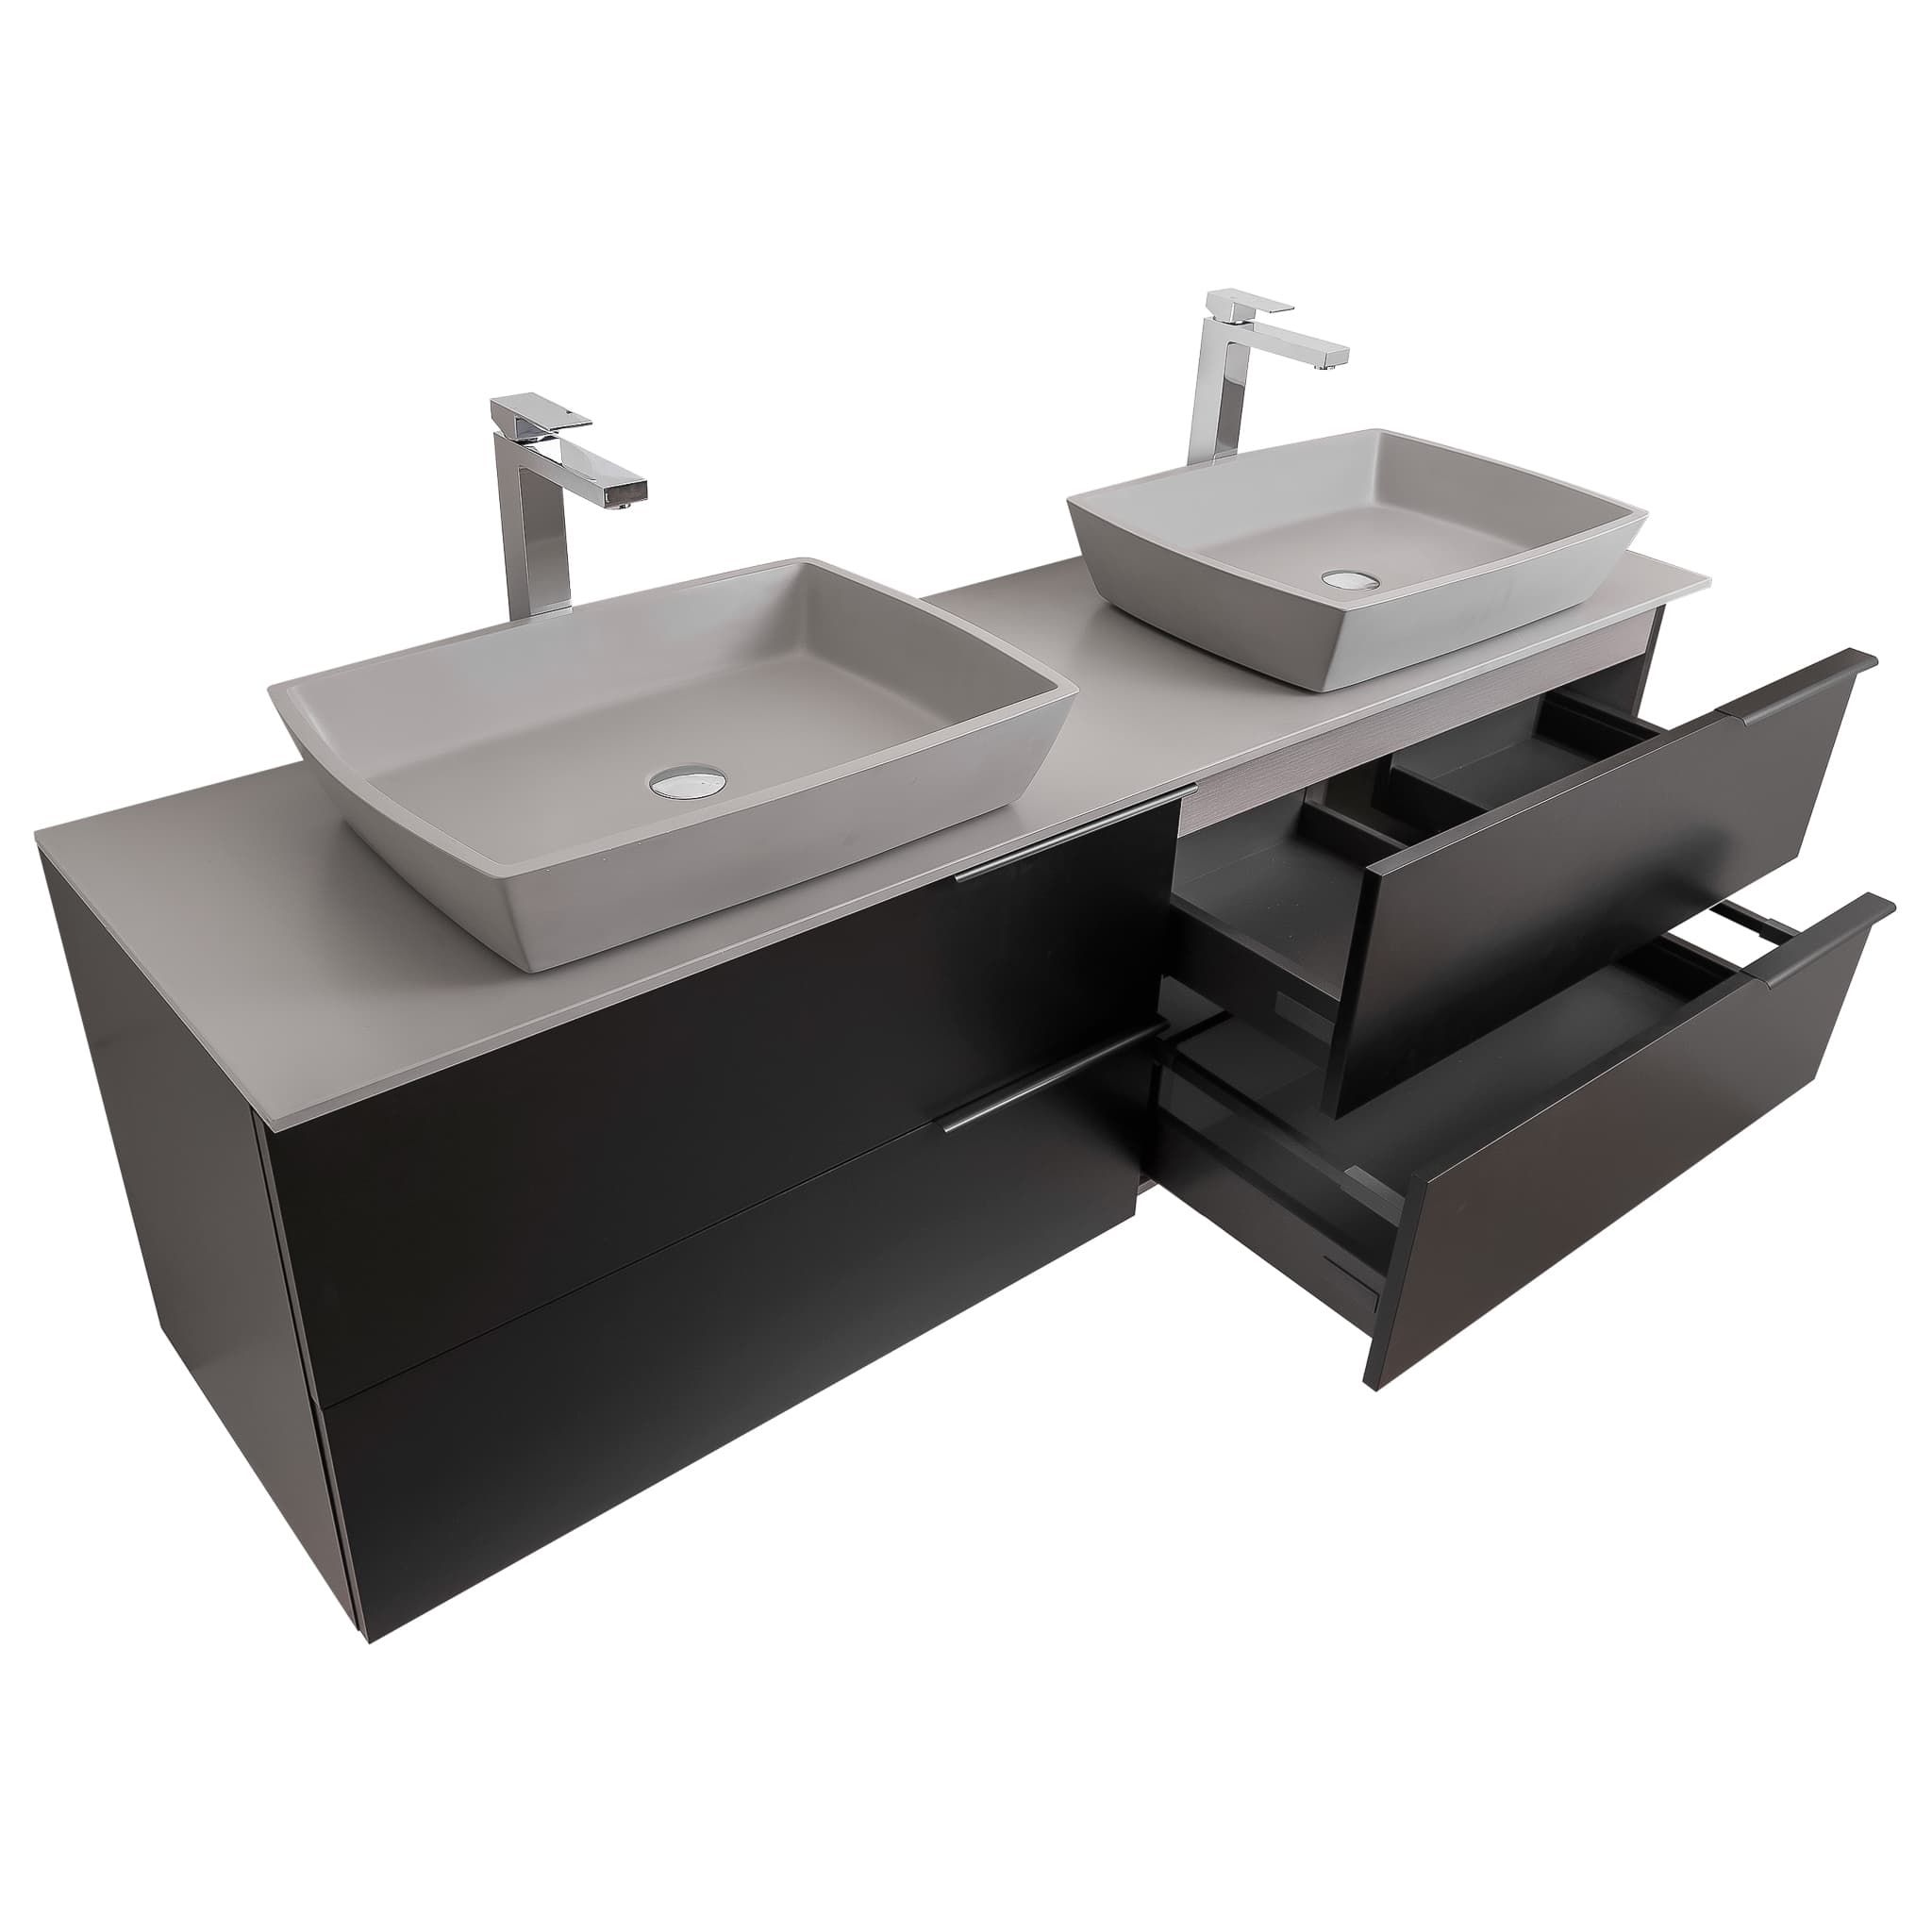 Mallorca 63 Matte Black Cabinet, Solid Surface Flat Grey Counter And Two Square Solid Surface Grey Basin 1316, Wall Mounted Modern Vanity Set